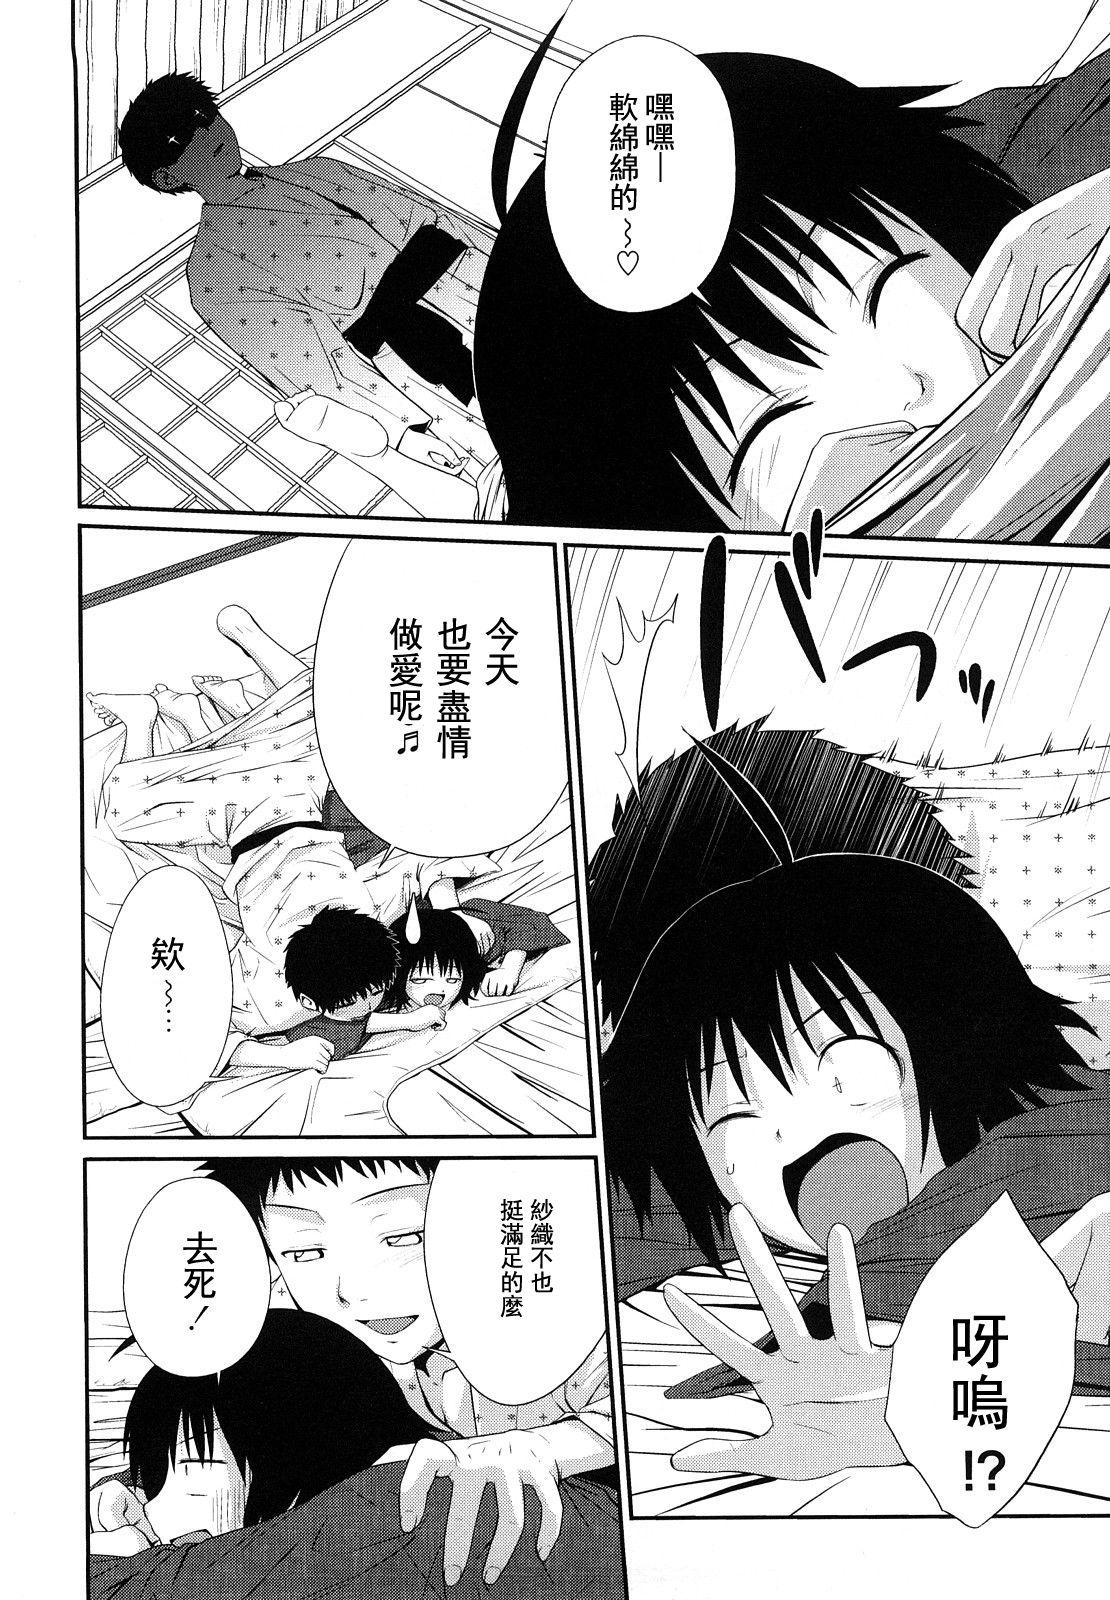 Sister Mix Ch. 1-5 10